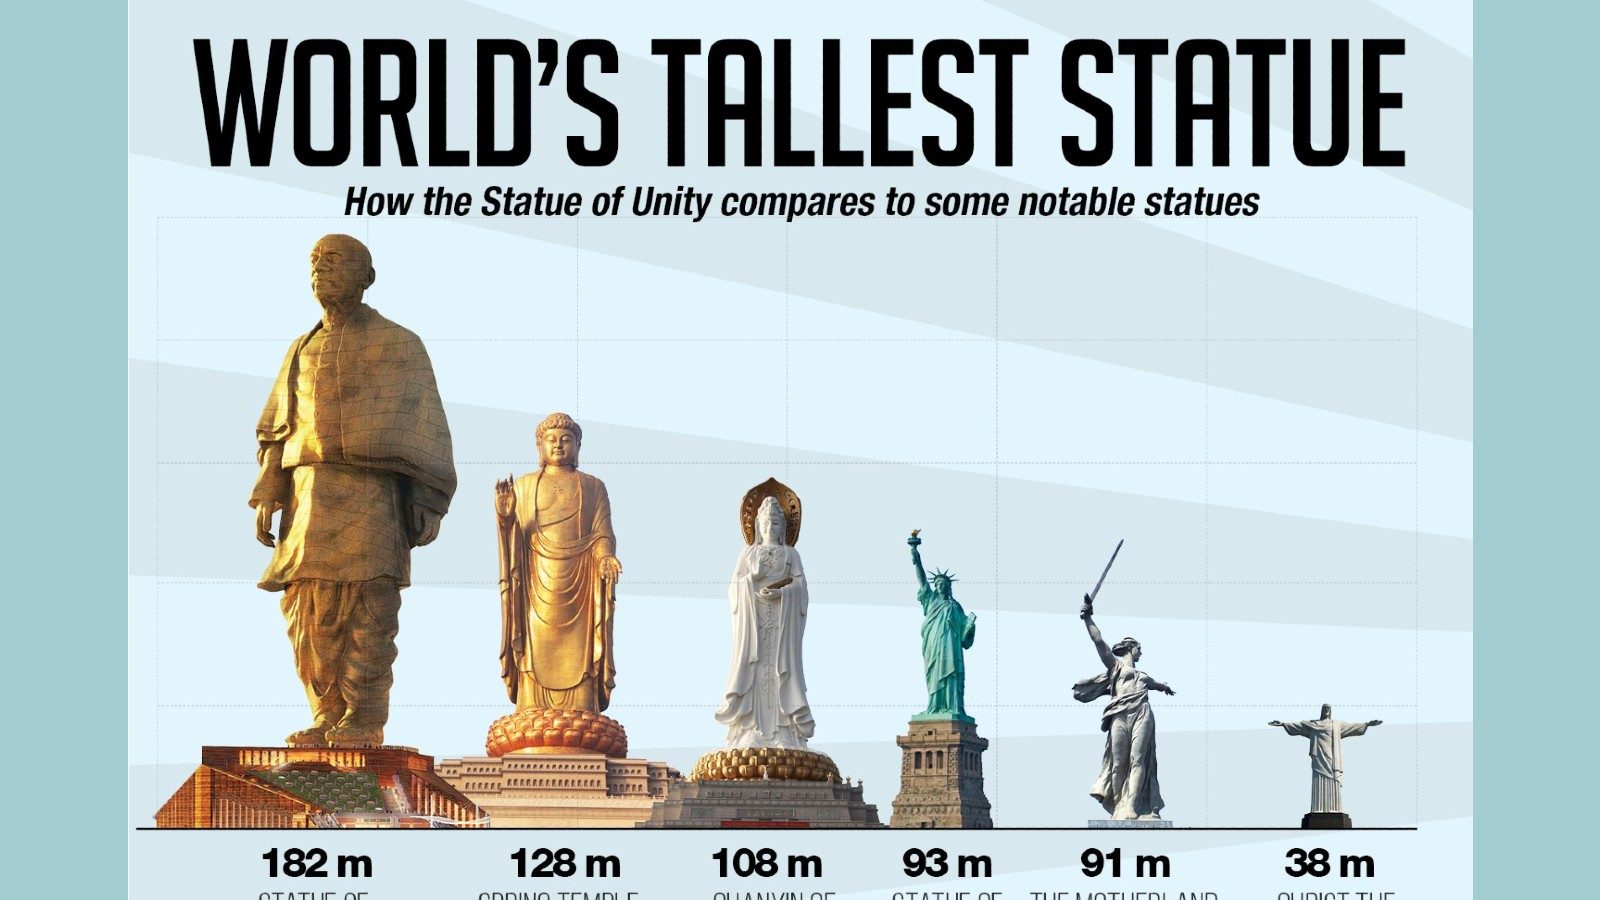 IN PICS: Statue of Unity, The World's Tallest Statue of Sardar